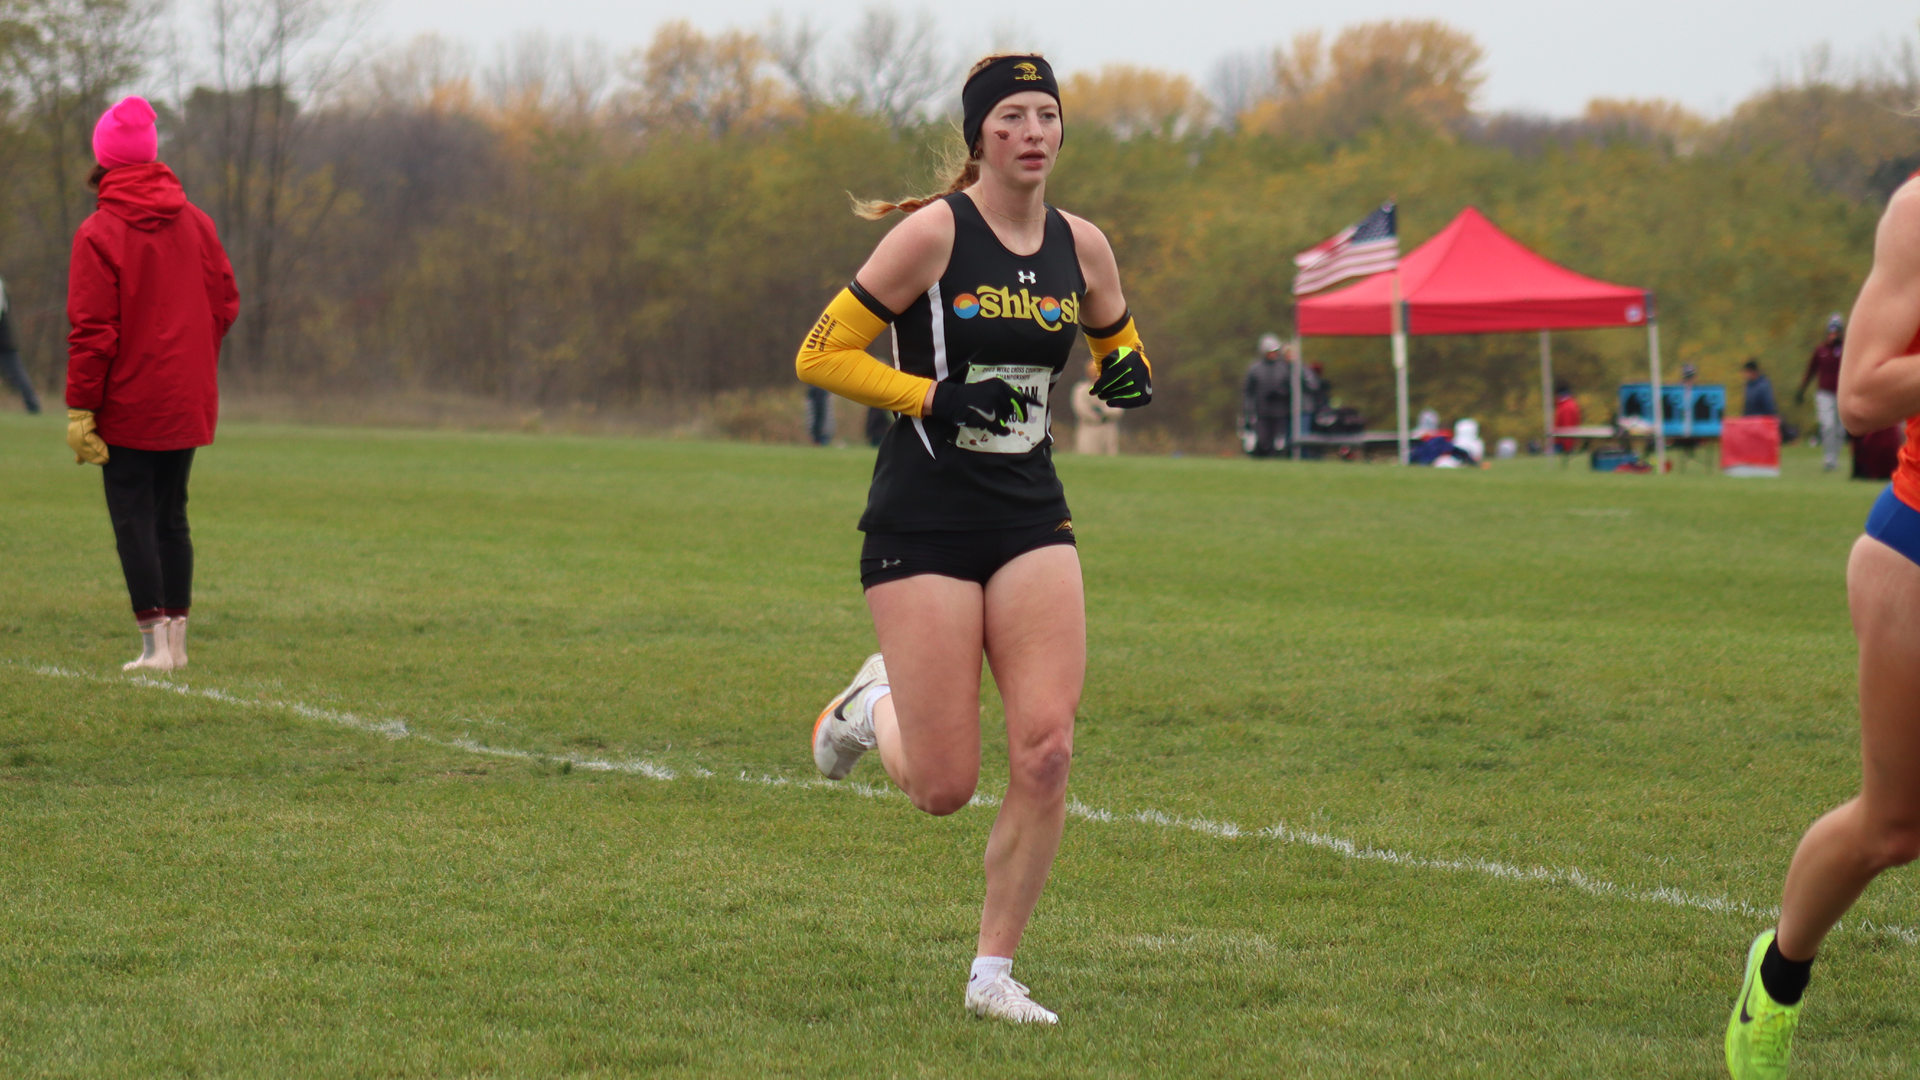 Cyna Madigan earned All-WIAC Second Team with a 12th-place, 22:39 finish